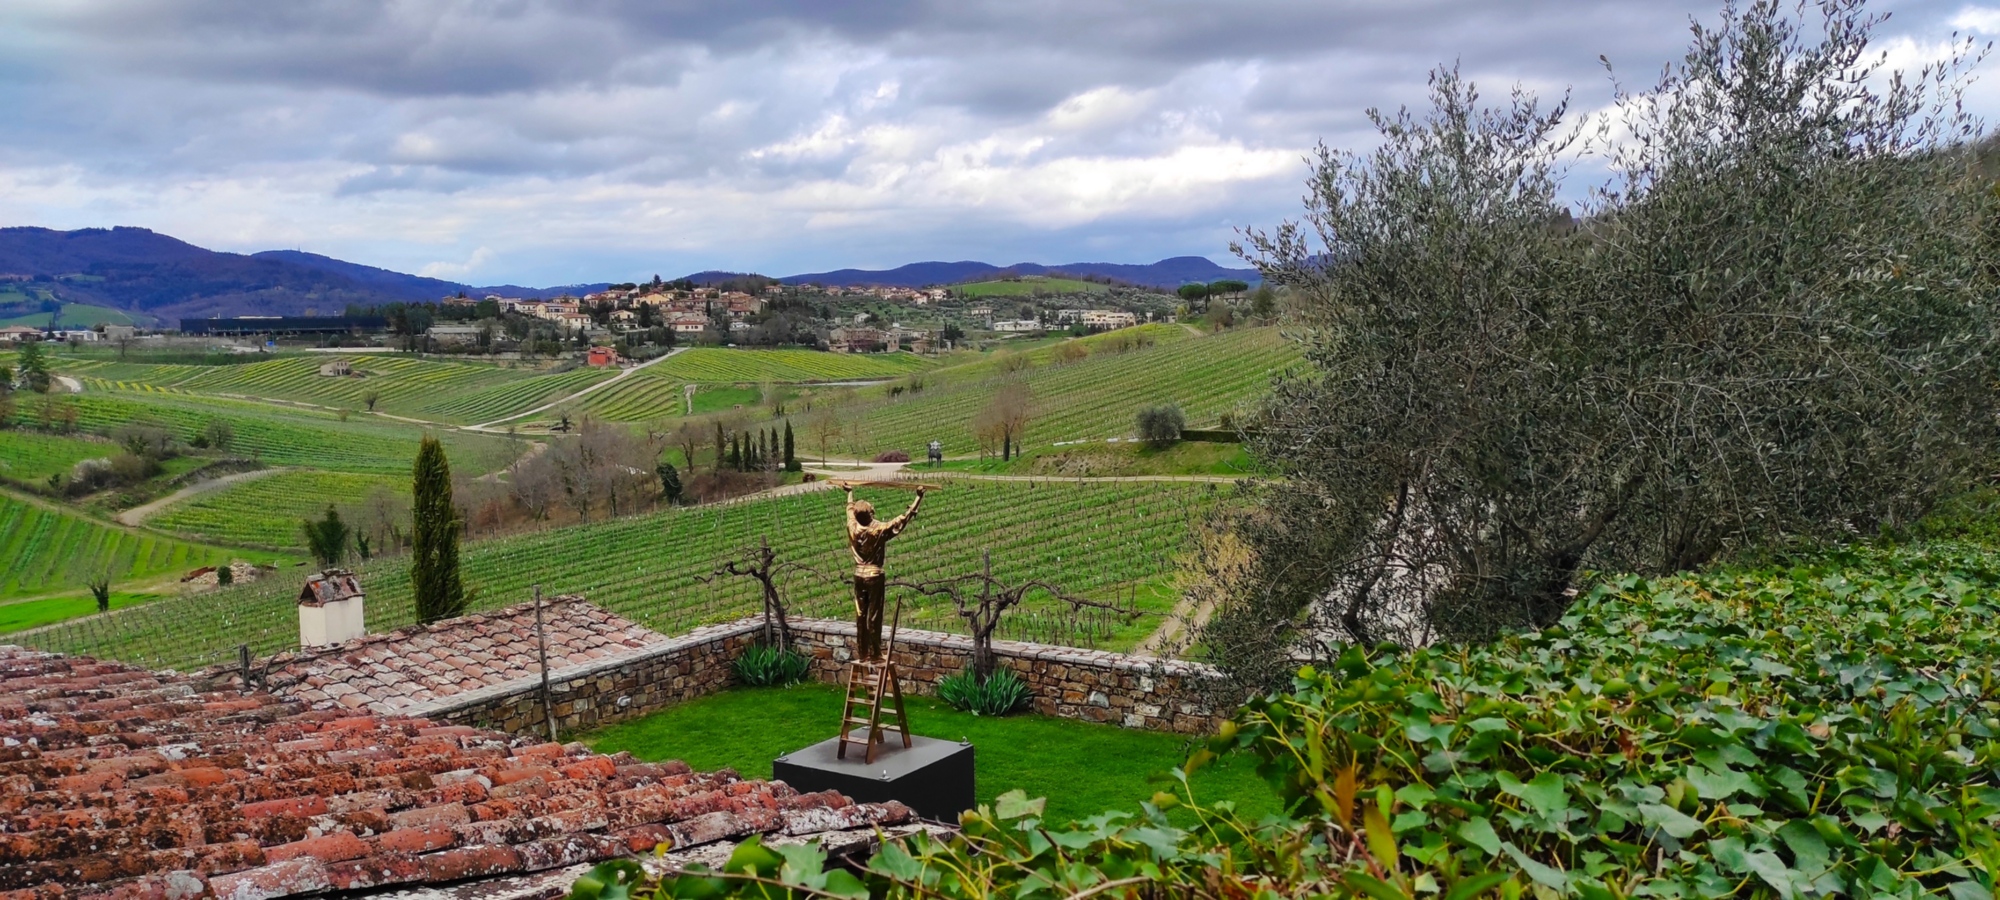 Walking and wine tour experience in Radda in Chianti